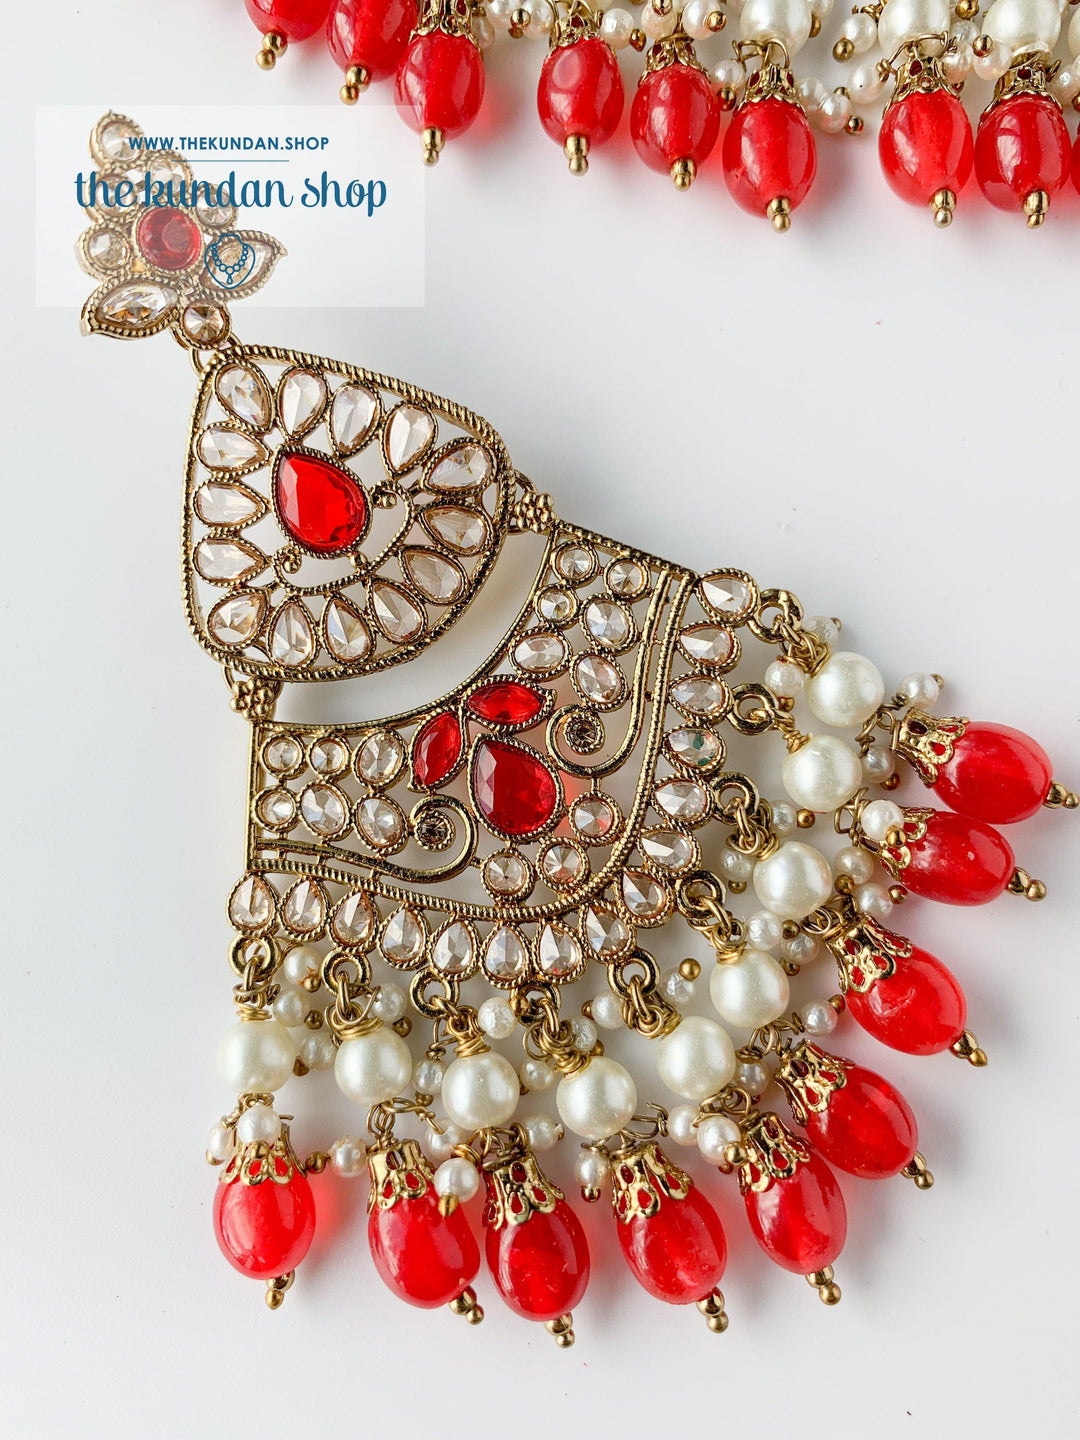 Locked In, In Red Necklace Sets THE KUNDAN SHOP 